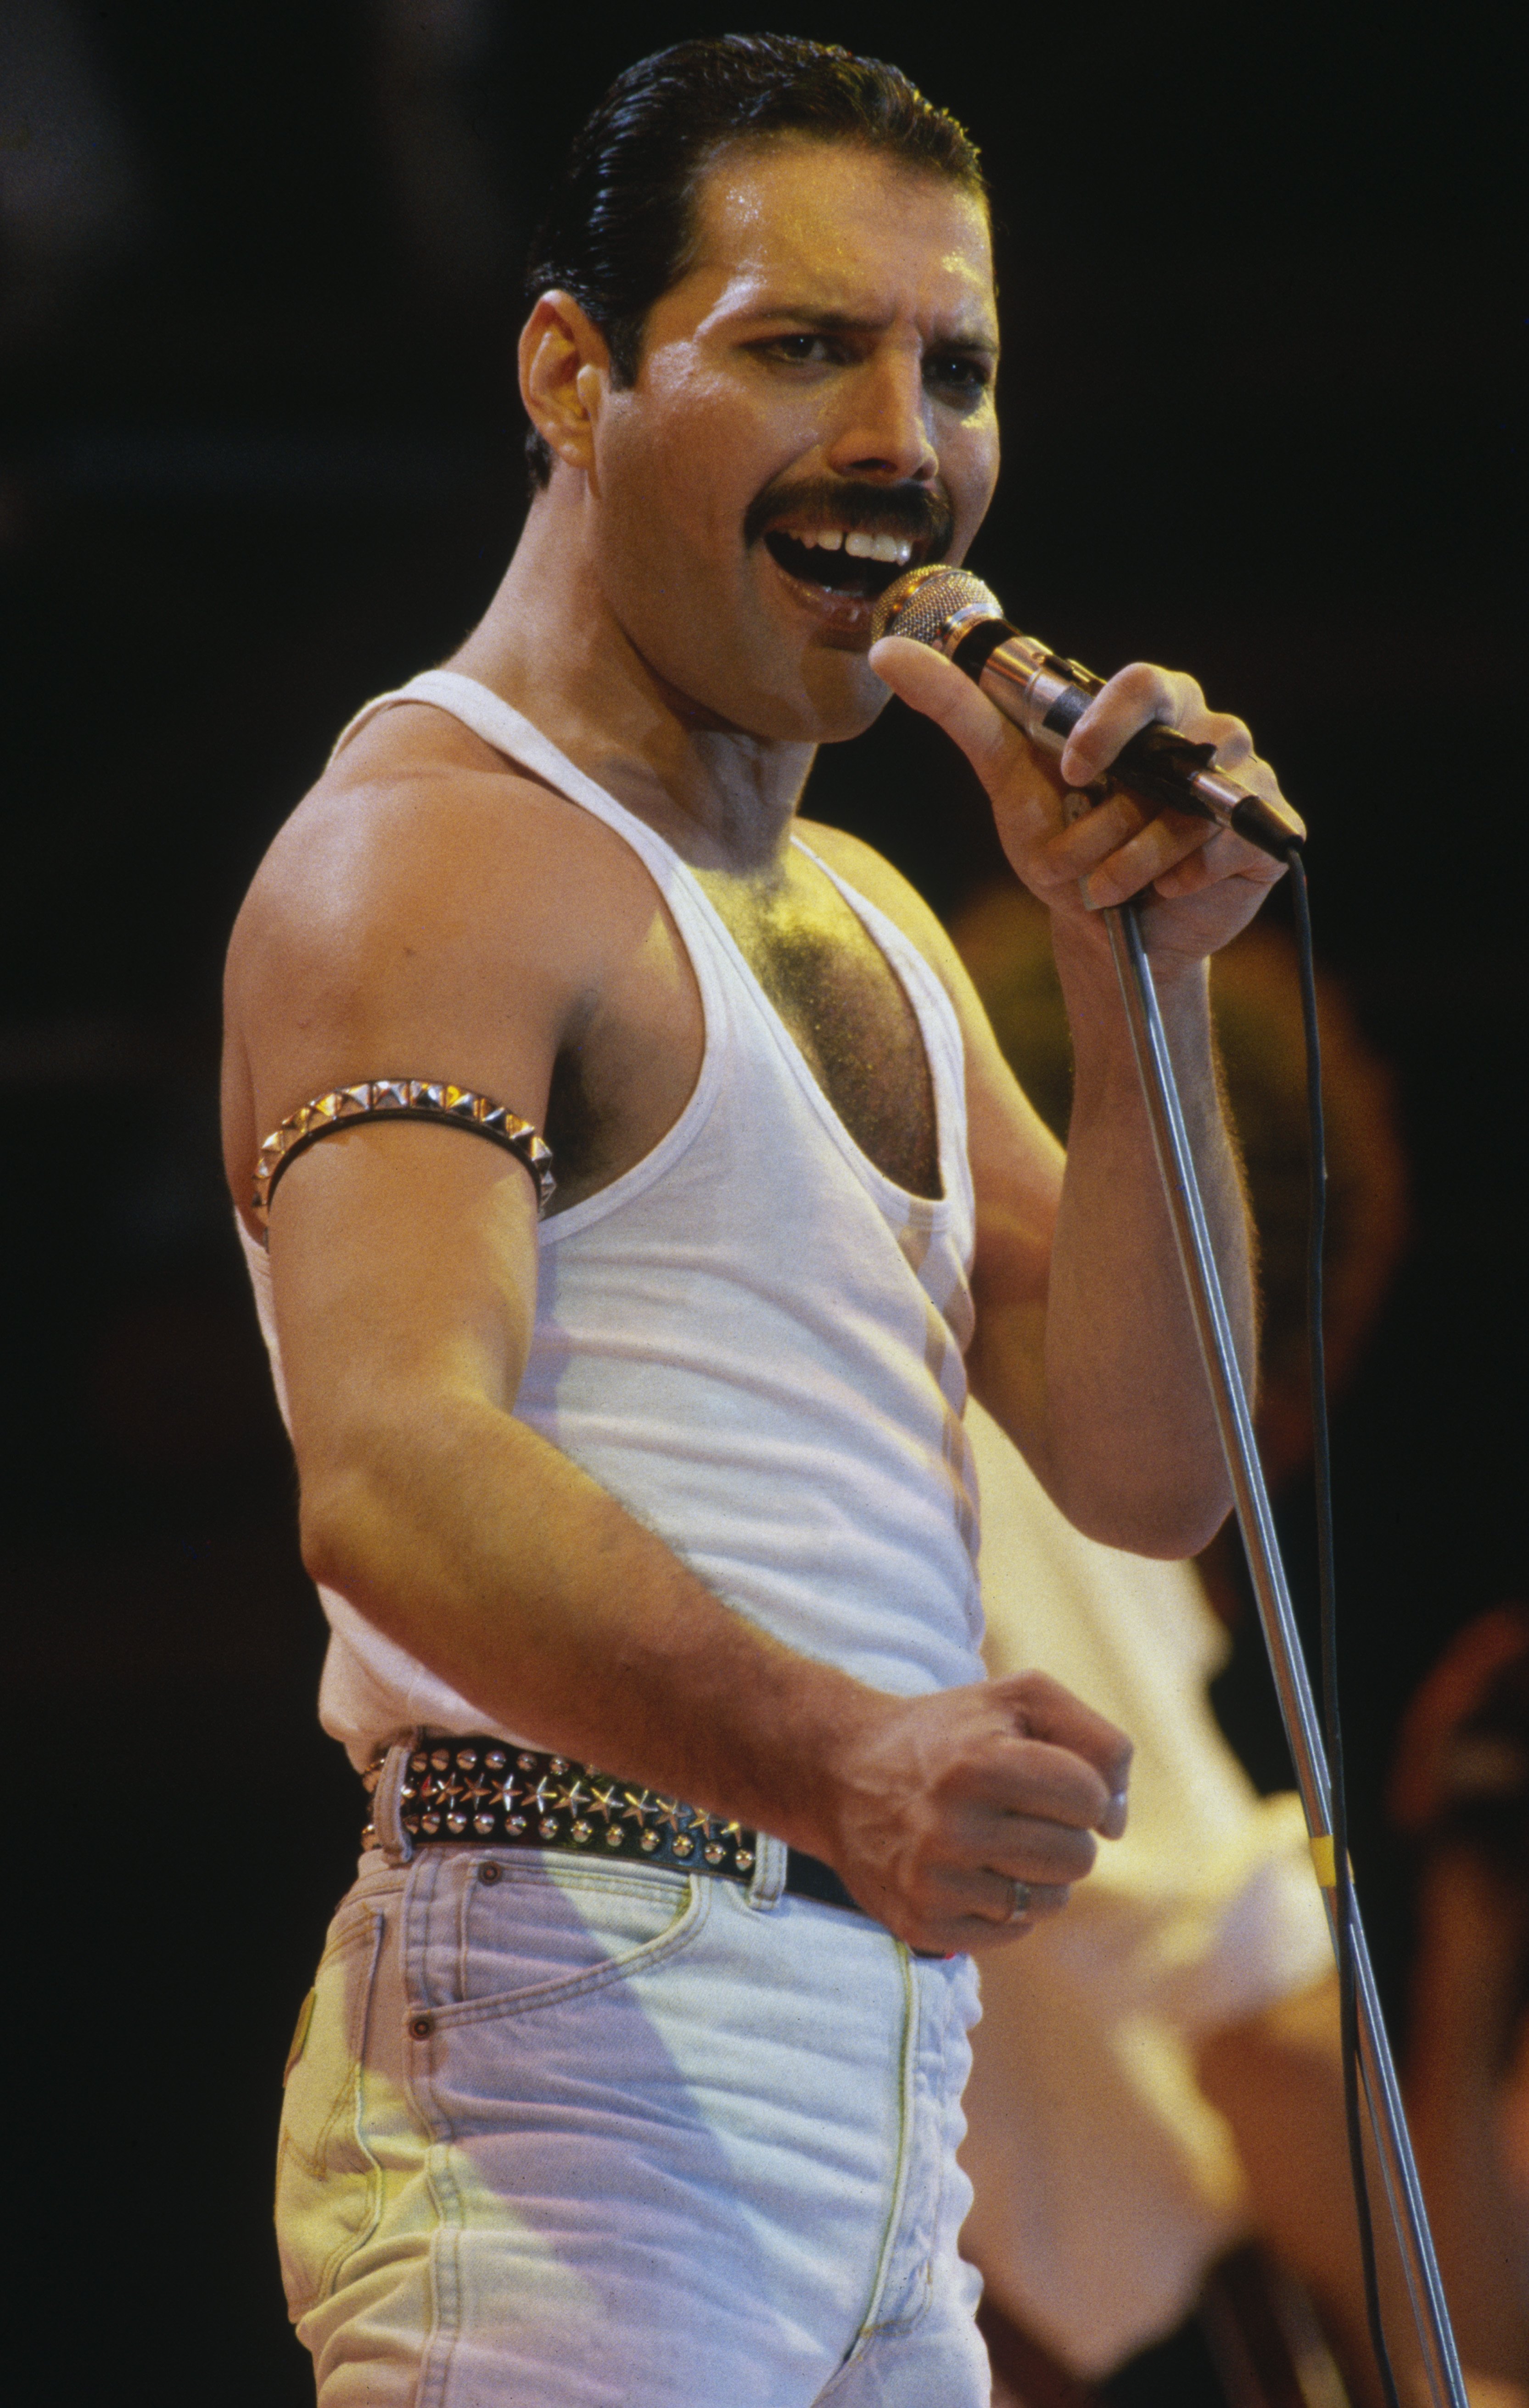 Freddie Mercury of Queen performs during Live Aid at Wembley Stadium on 13 July 1985 | Photo: GettyImages